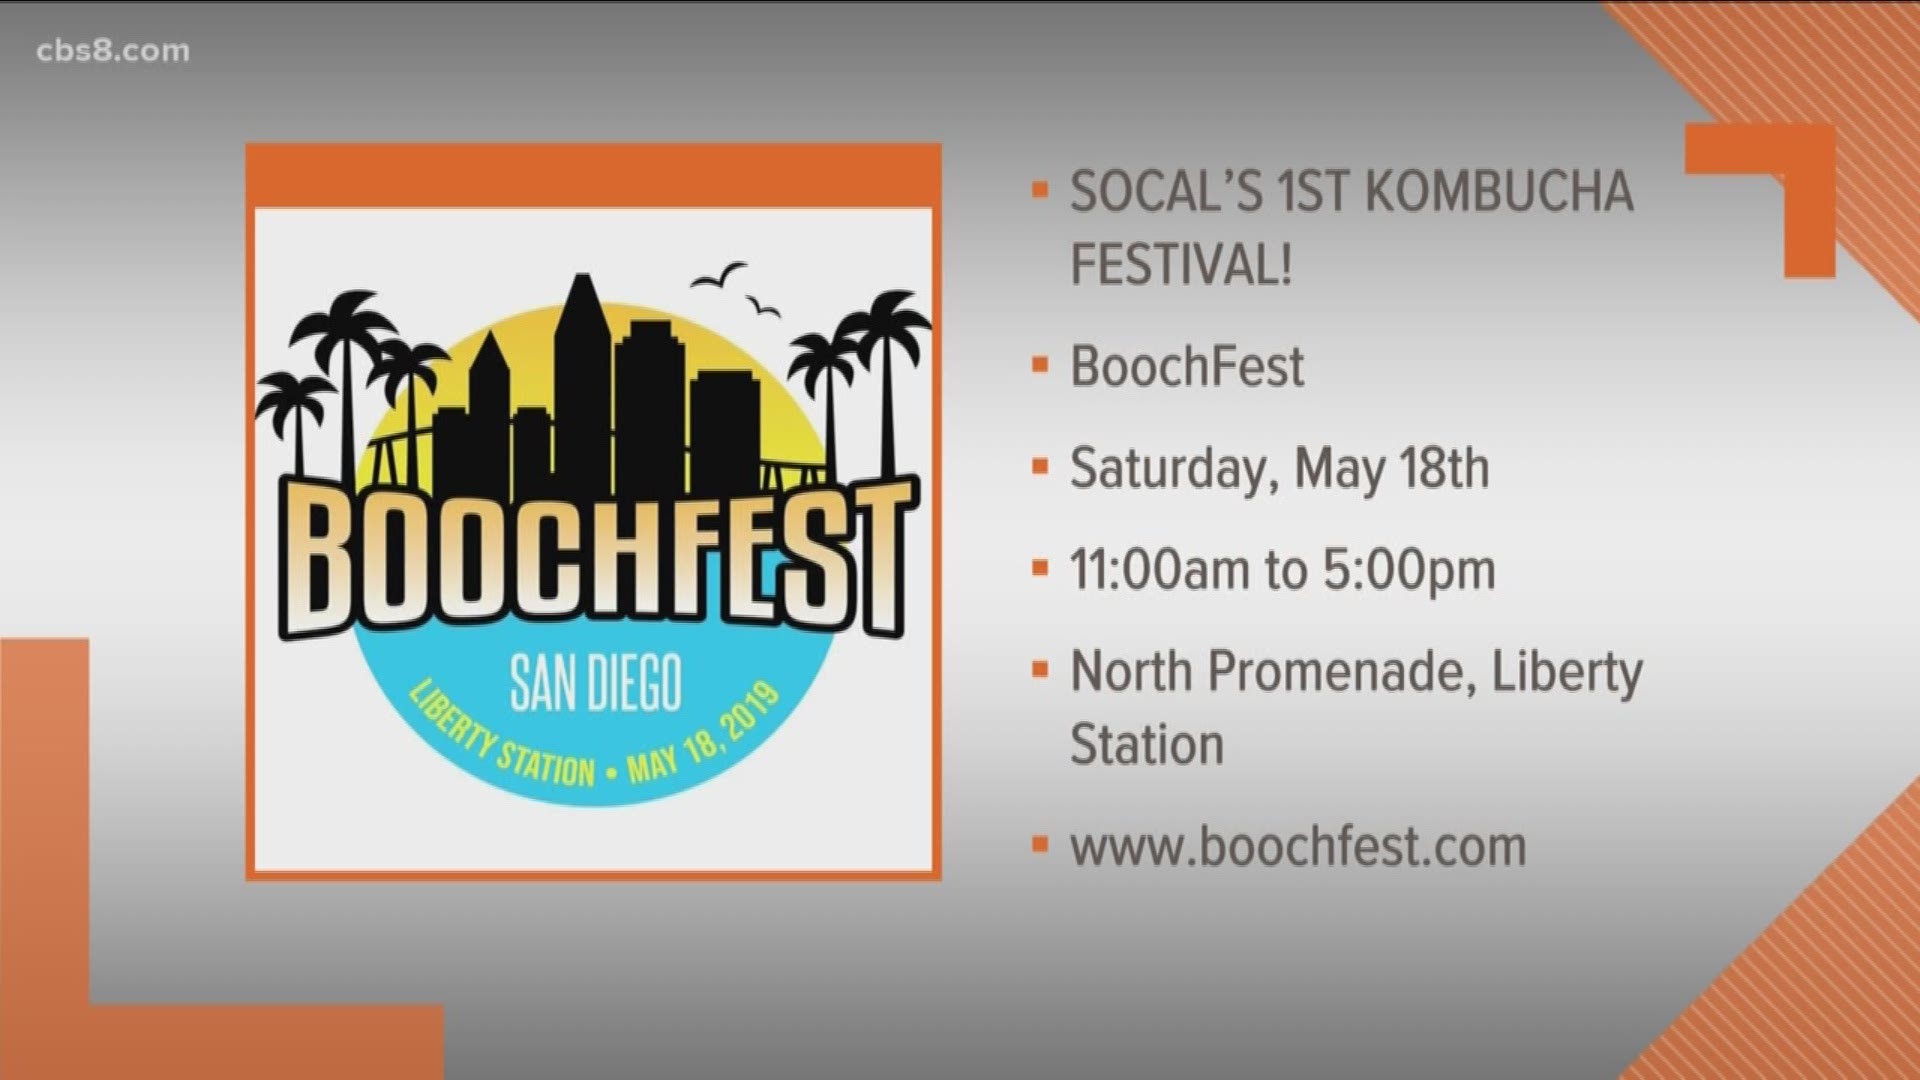 Boochfest is on May 18 from 11am-3pm at Liberty Station San Diego